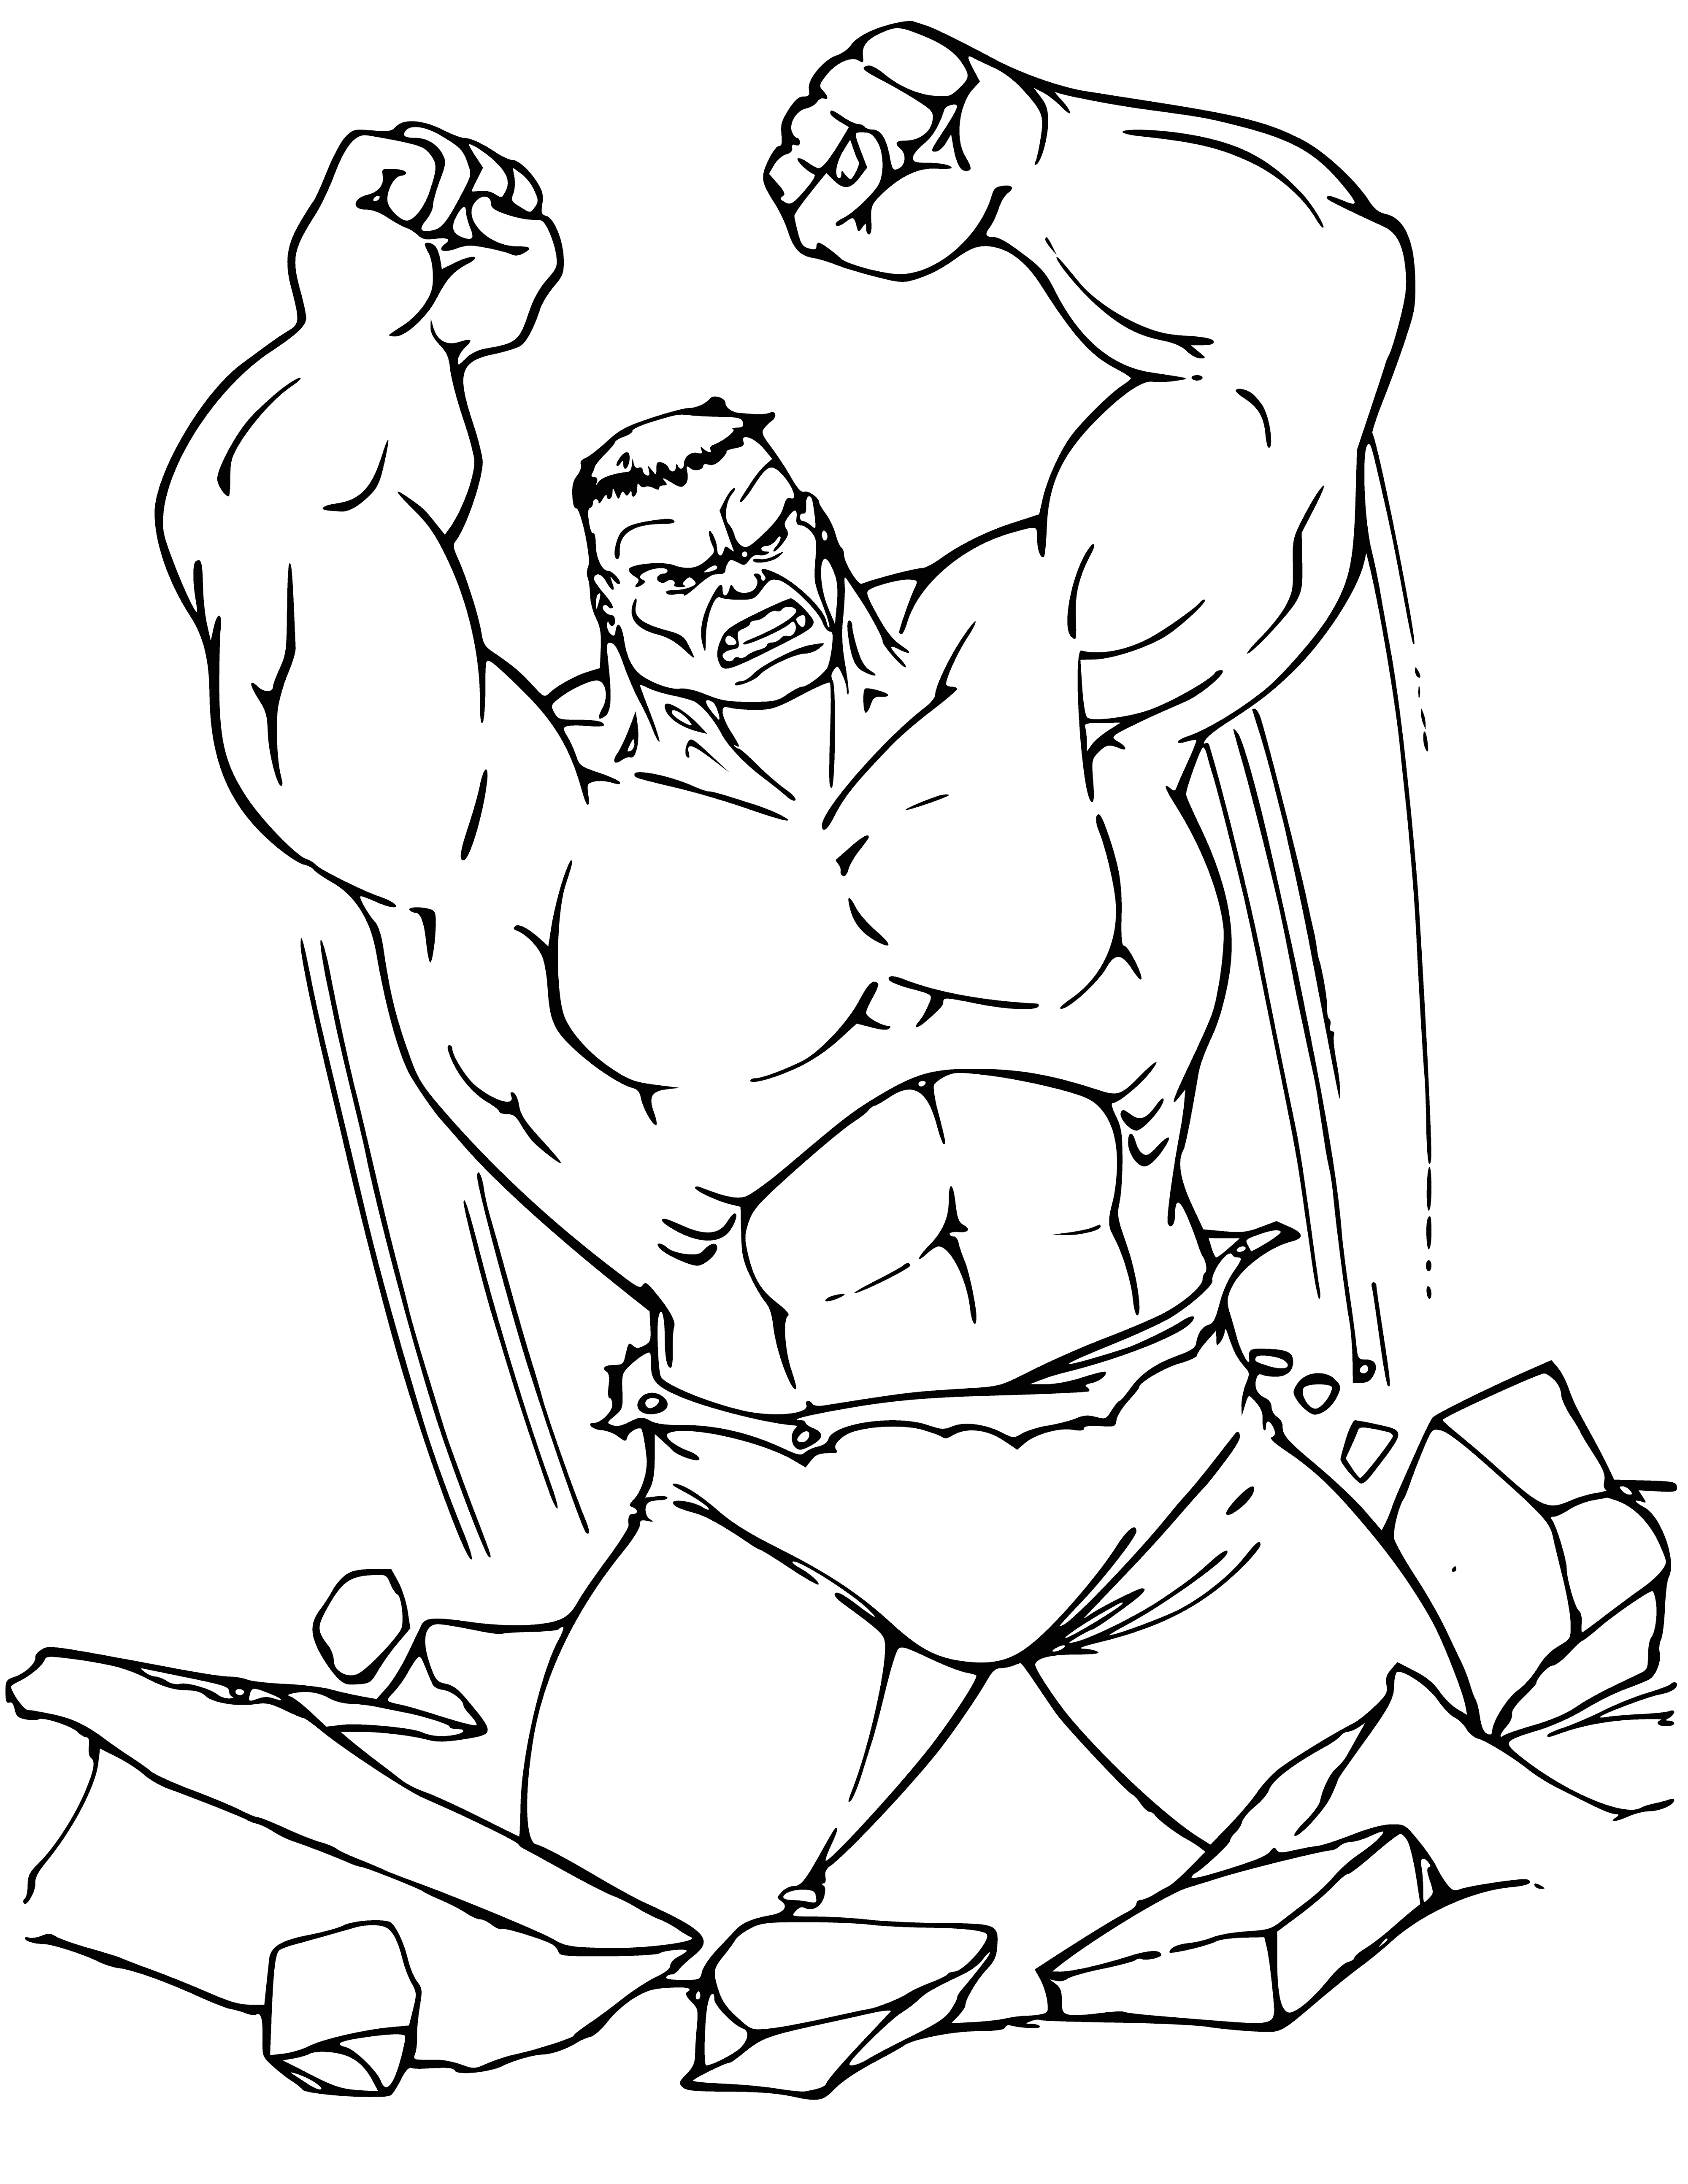 coloring page: The Hulk is a green, muscular giant with large hands & feet and an angry expression, wearing purple torn pants. #Marvel